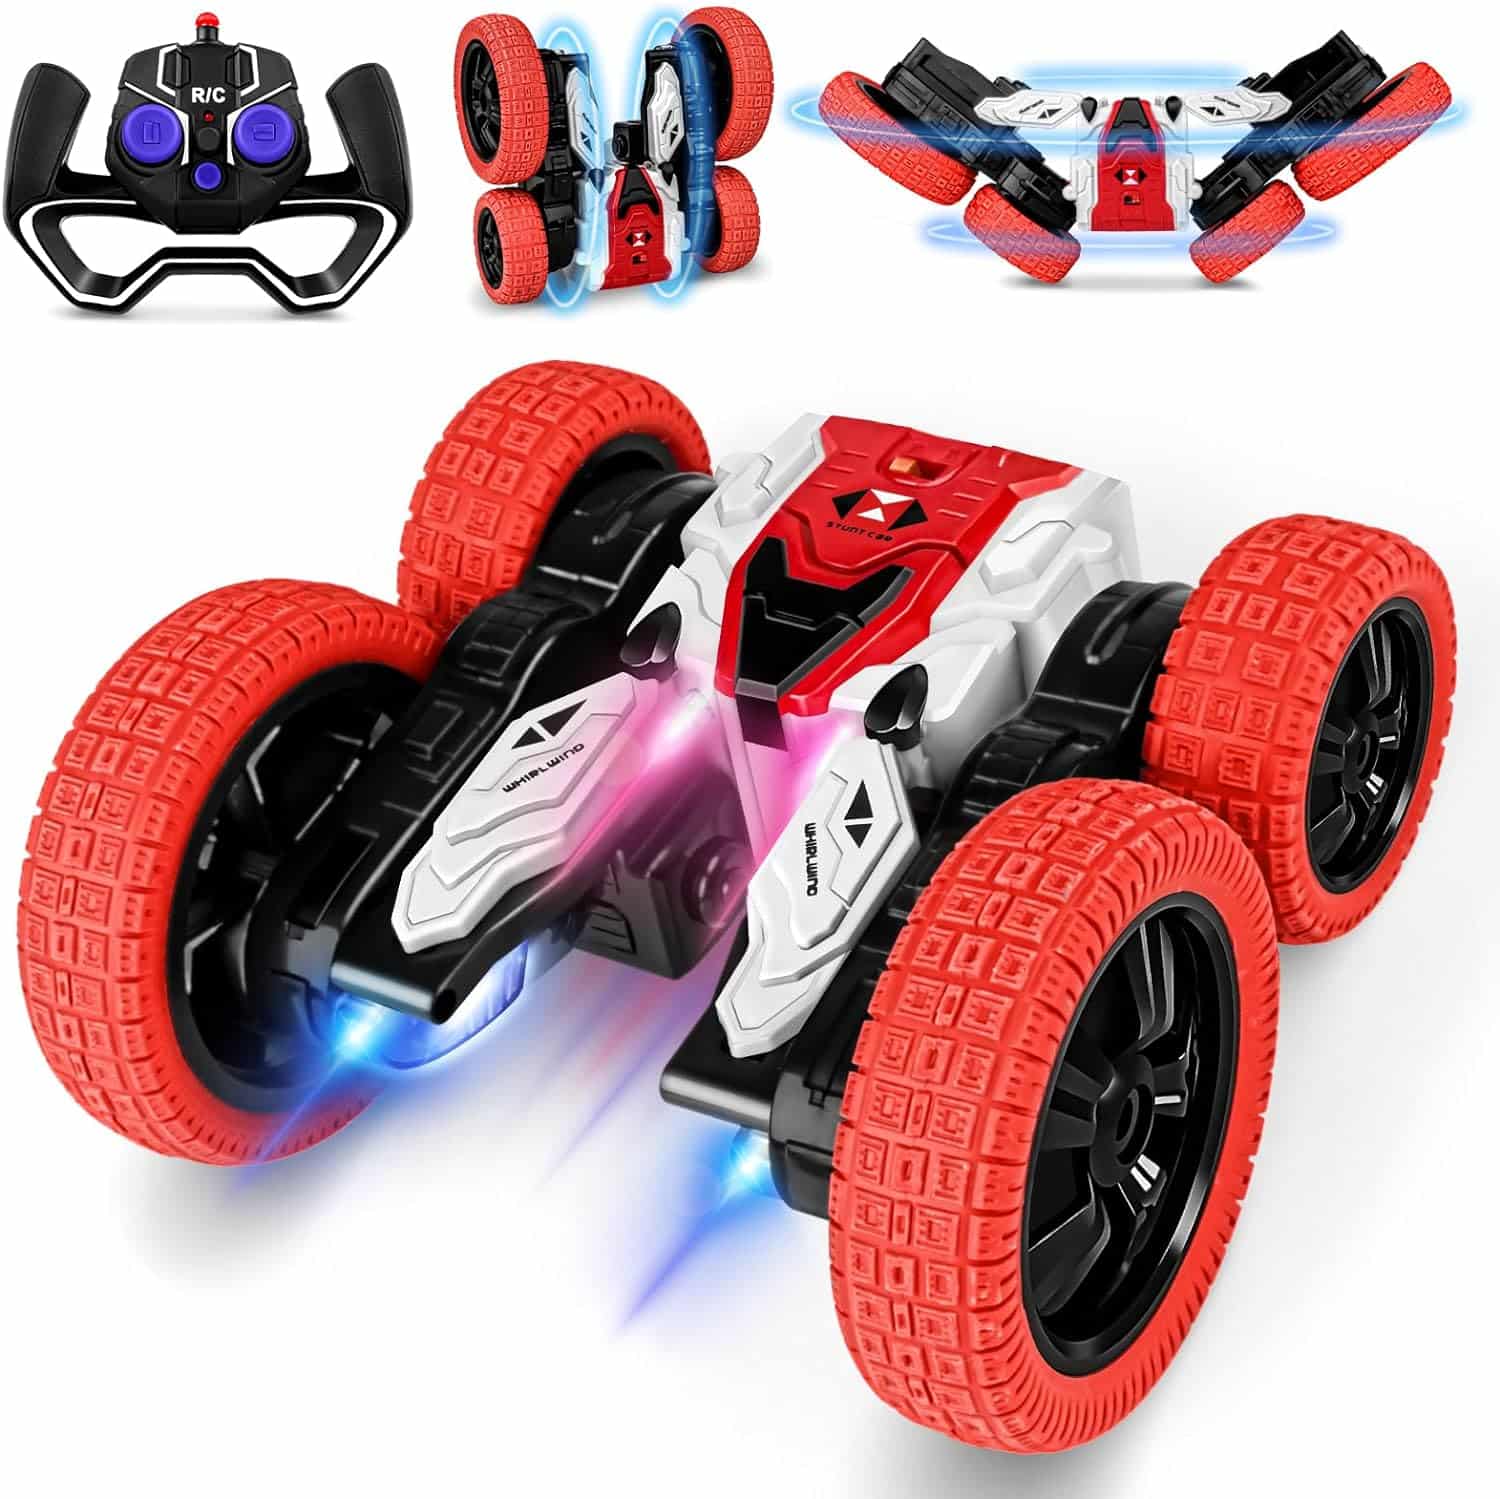 RC Stunt Car for Kids - The Ultimate Remote Control Car Review